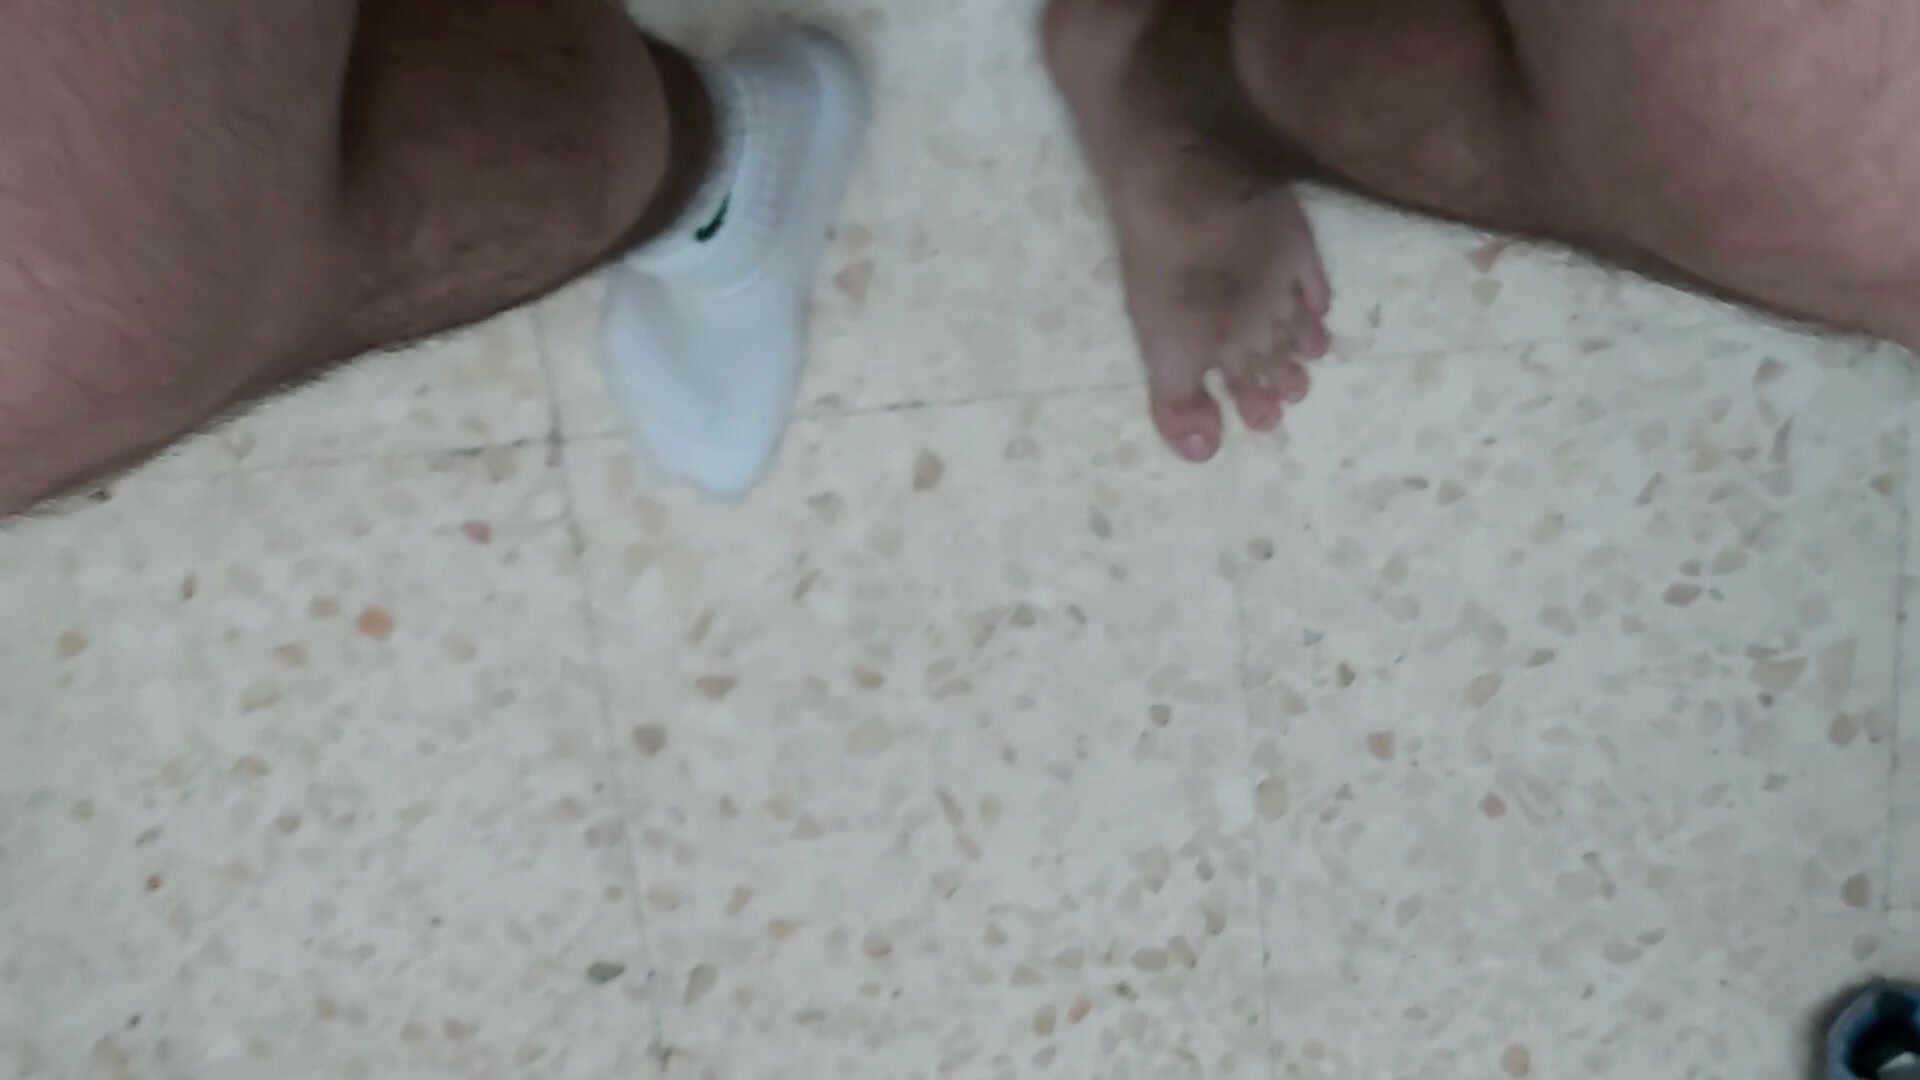 My legs and feet - video 2